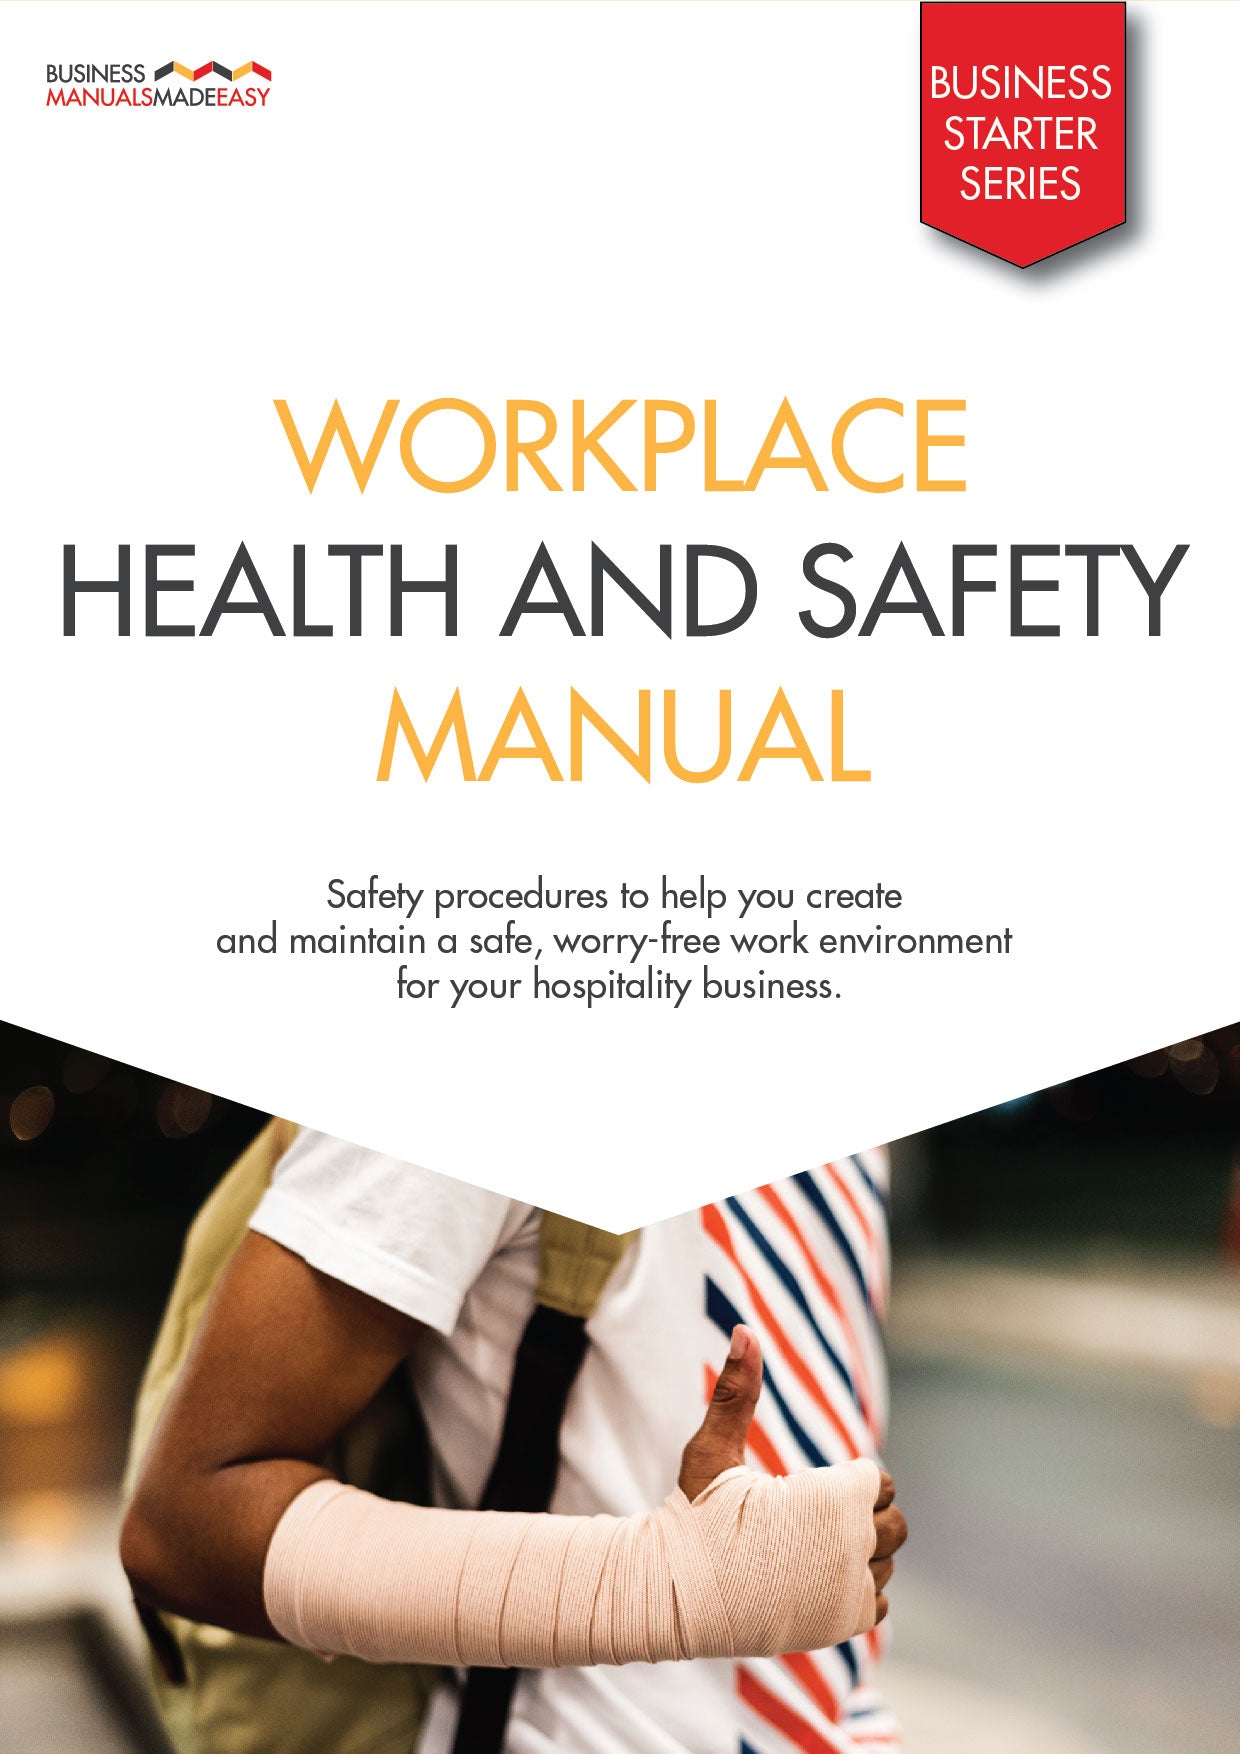 Business Manuals Made Easy: Workplace Health and Safety Manual. This manual has all your WHS (Workplace Health and Safety requirements) in one place. Comply with Fair Work and Safe Work conditions, reduce risk, litigation and fines for staff issues.